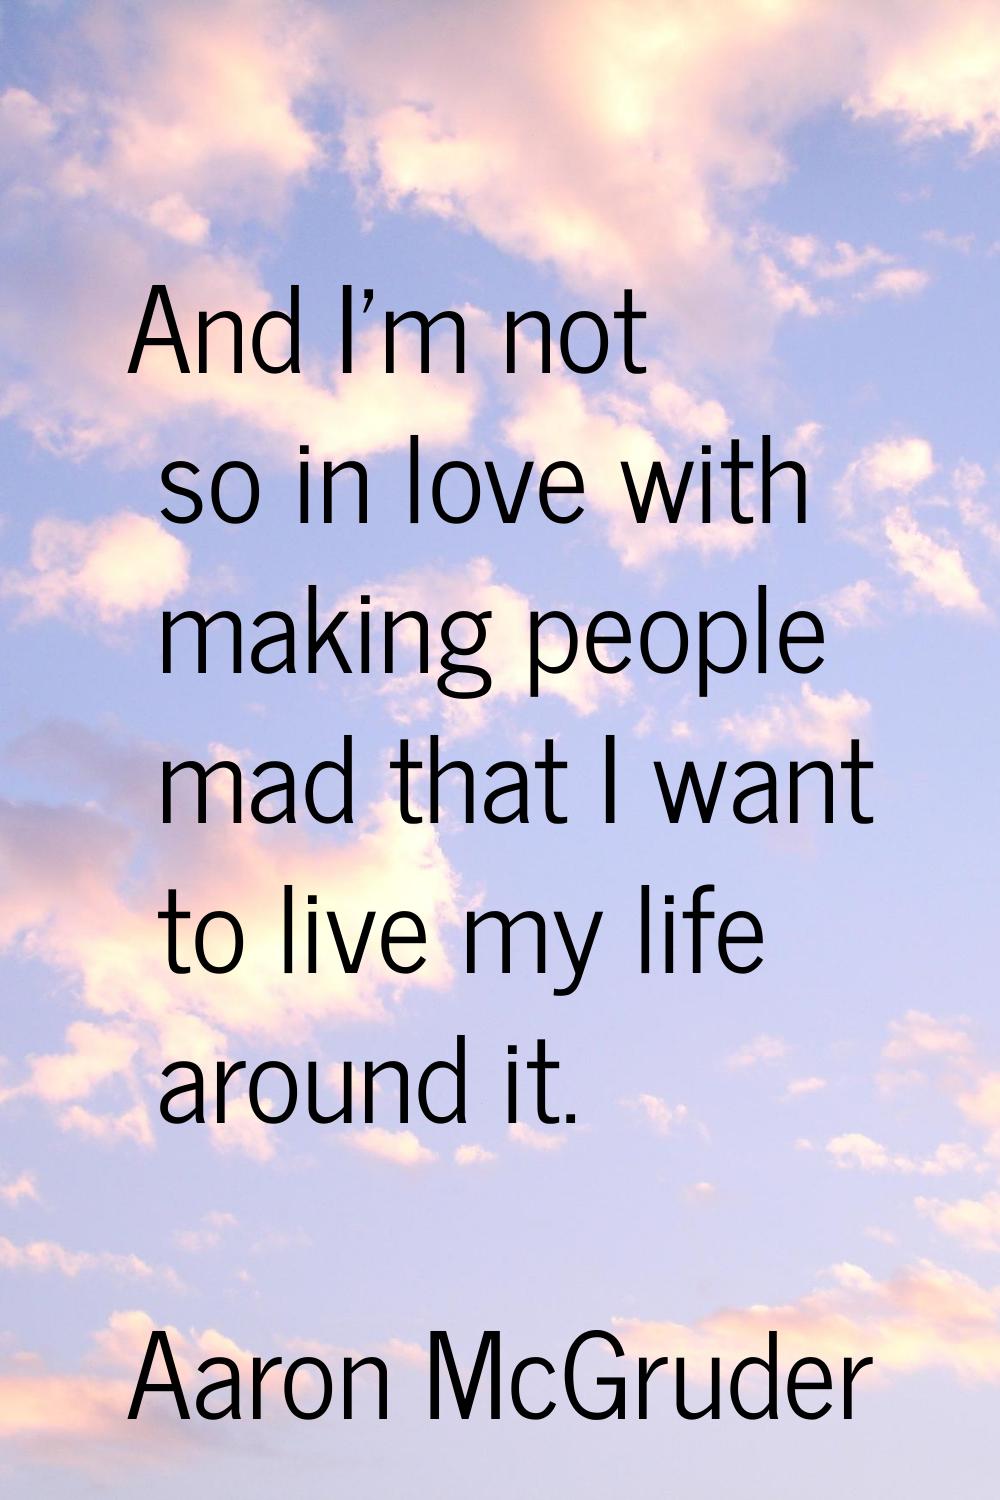 And I'm not so in love with making people mad that I want to live my life around it.